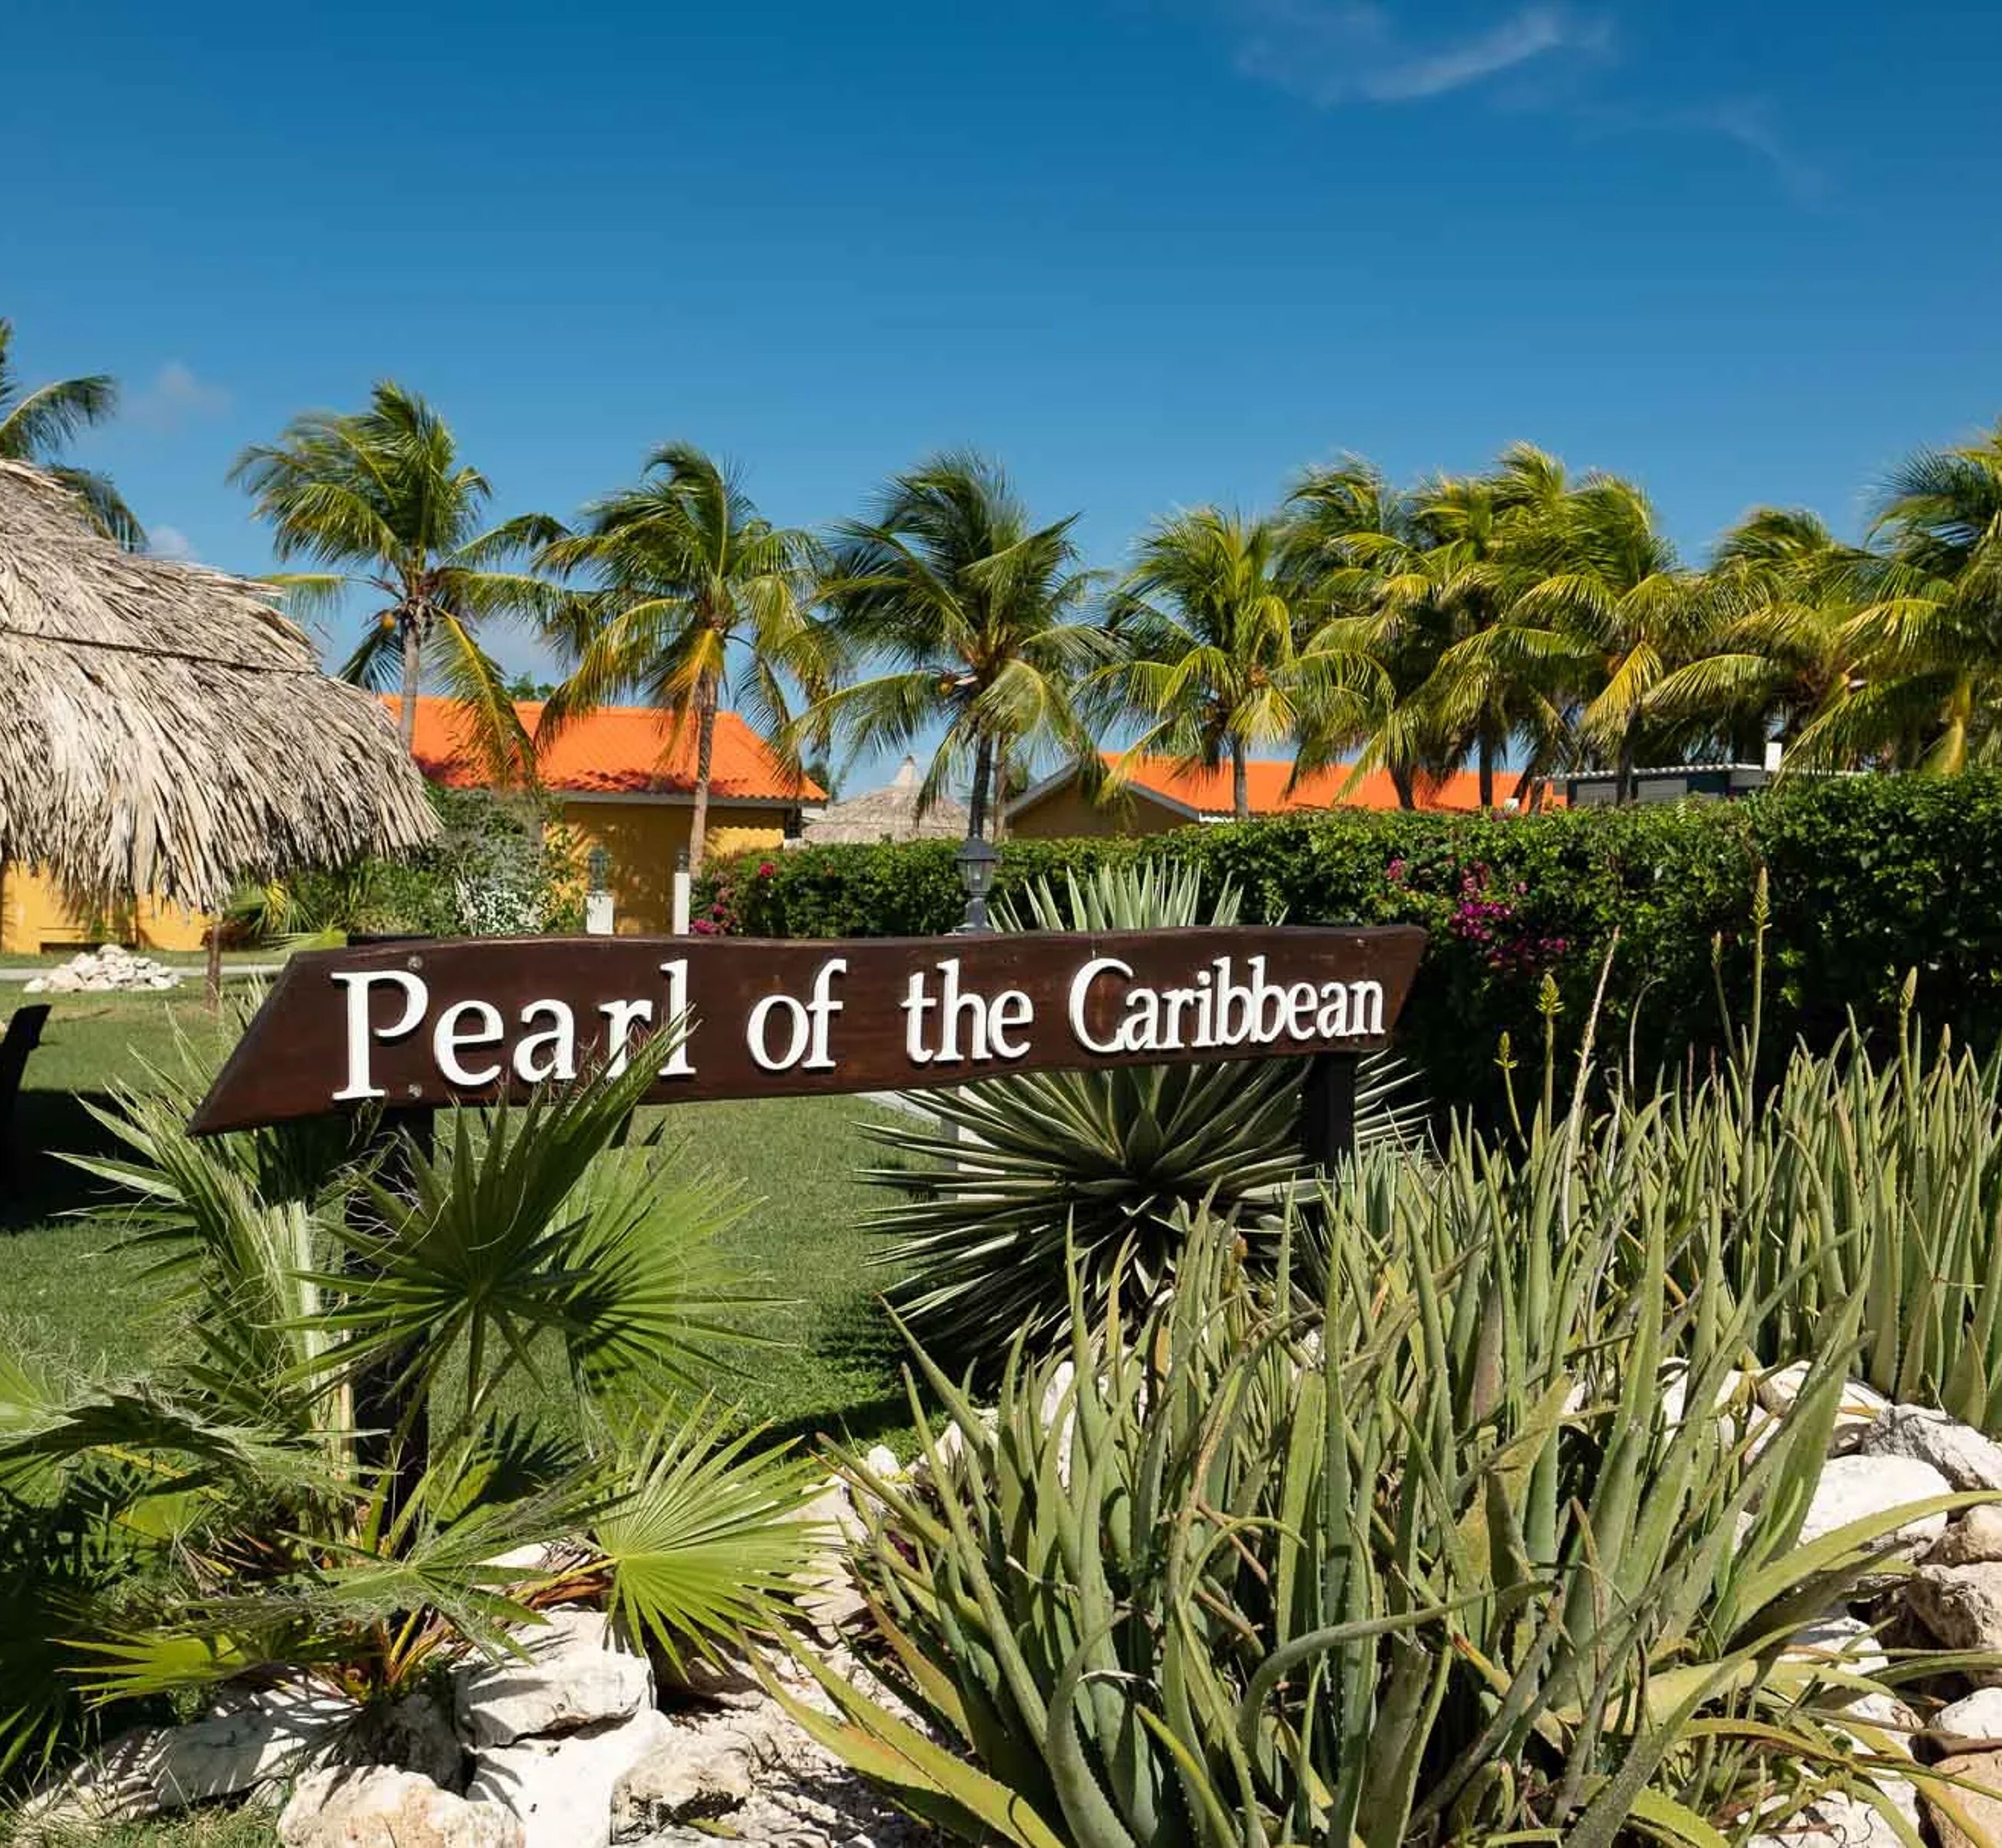 The Pearl of the Caribbean